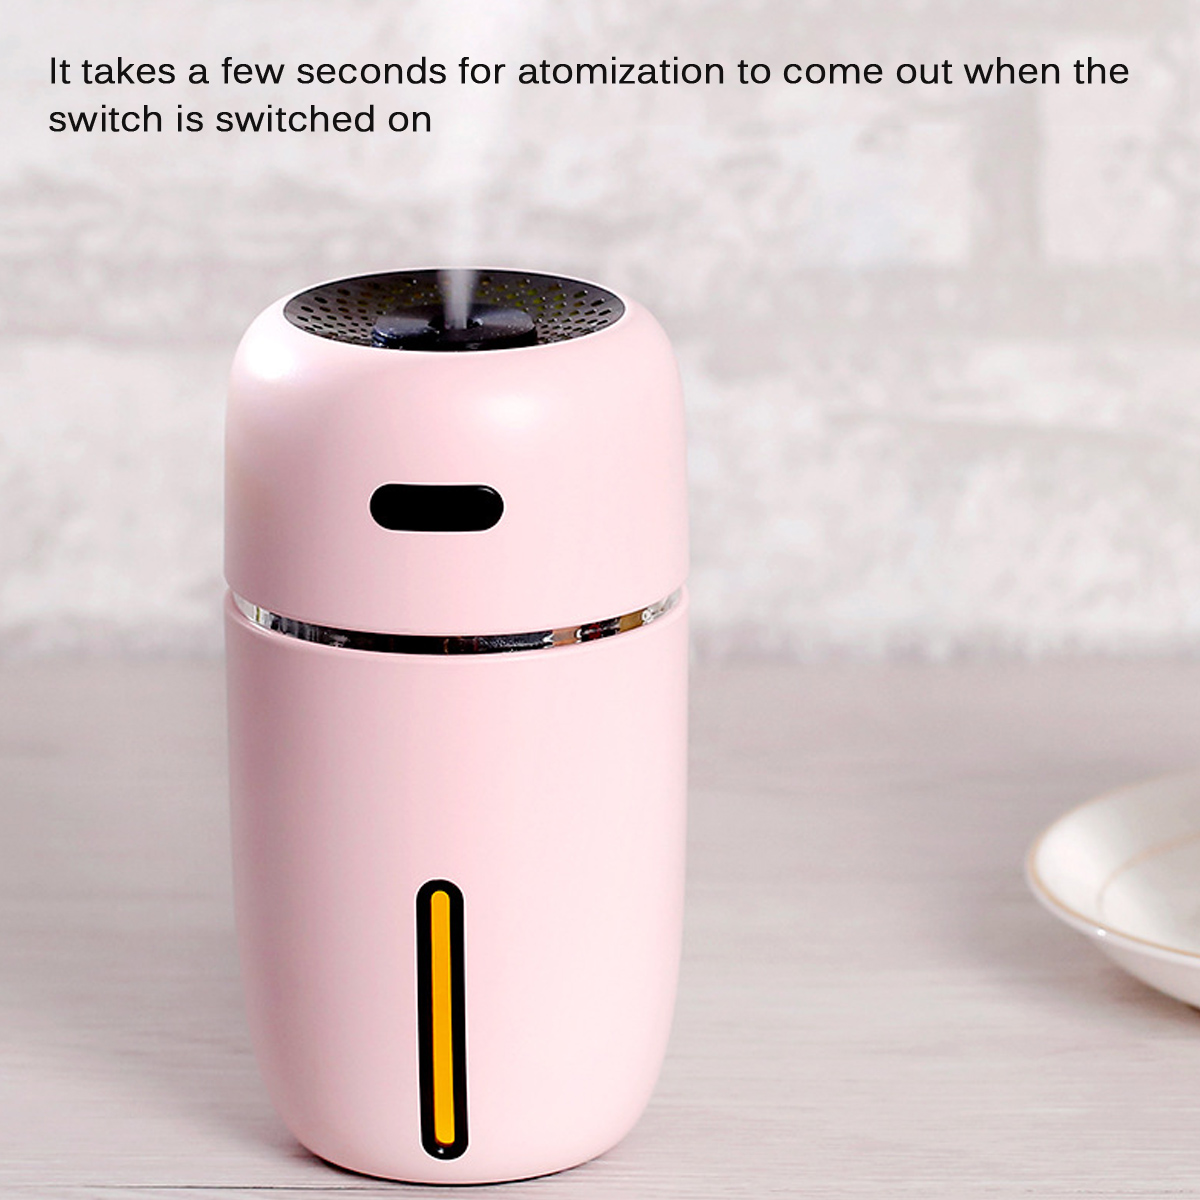 200ml-Electric-Air-Humidifier-Diffuser-Aroma-Mist-Purifier-LED-Light-USB-Charging-Power-Bank-for-Por-1809965-2